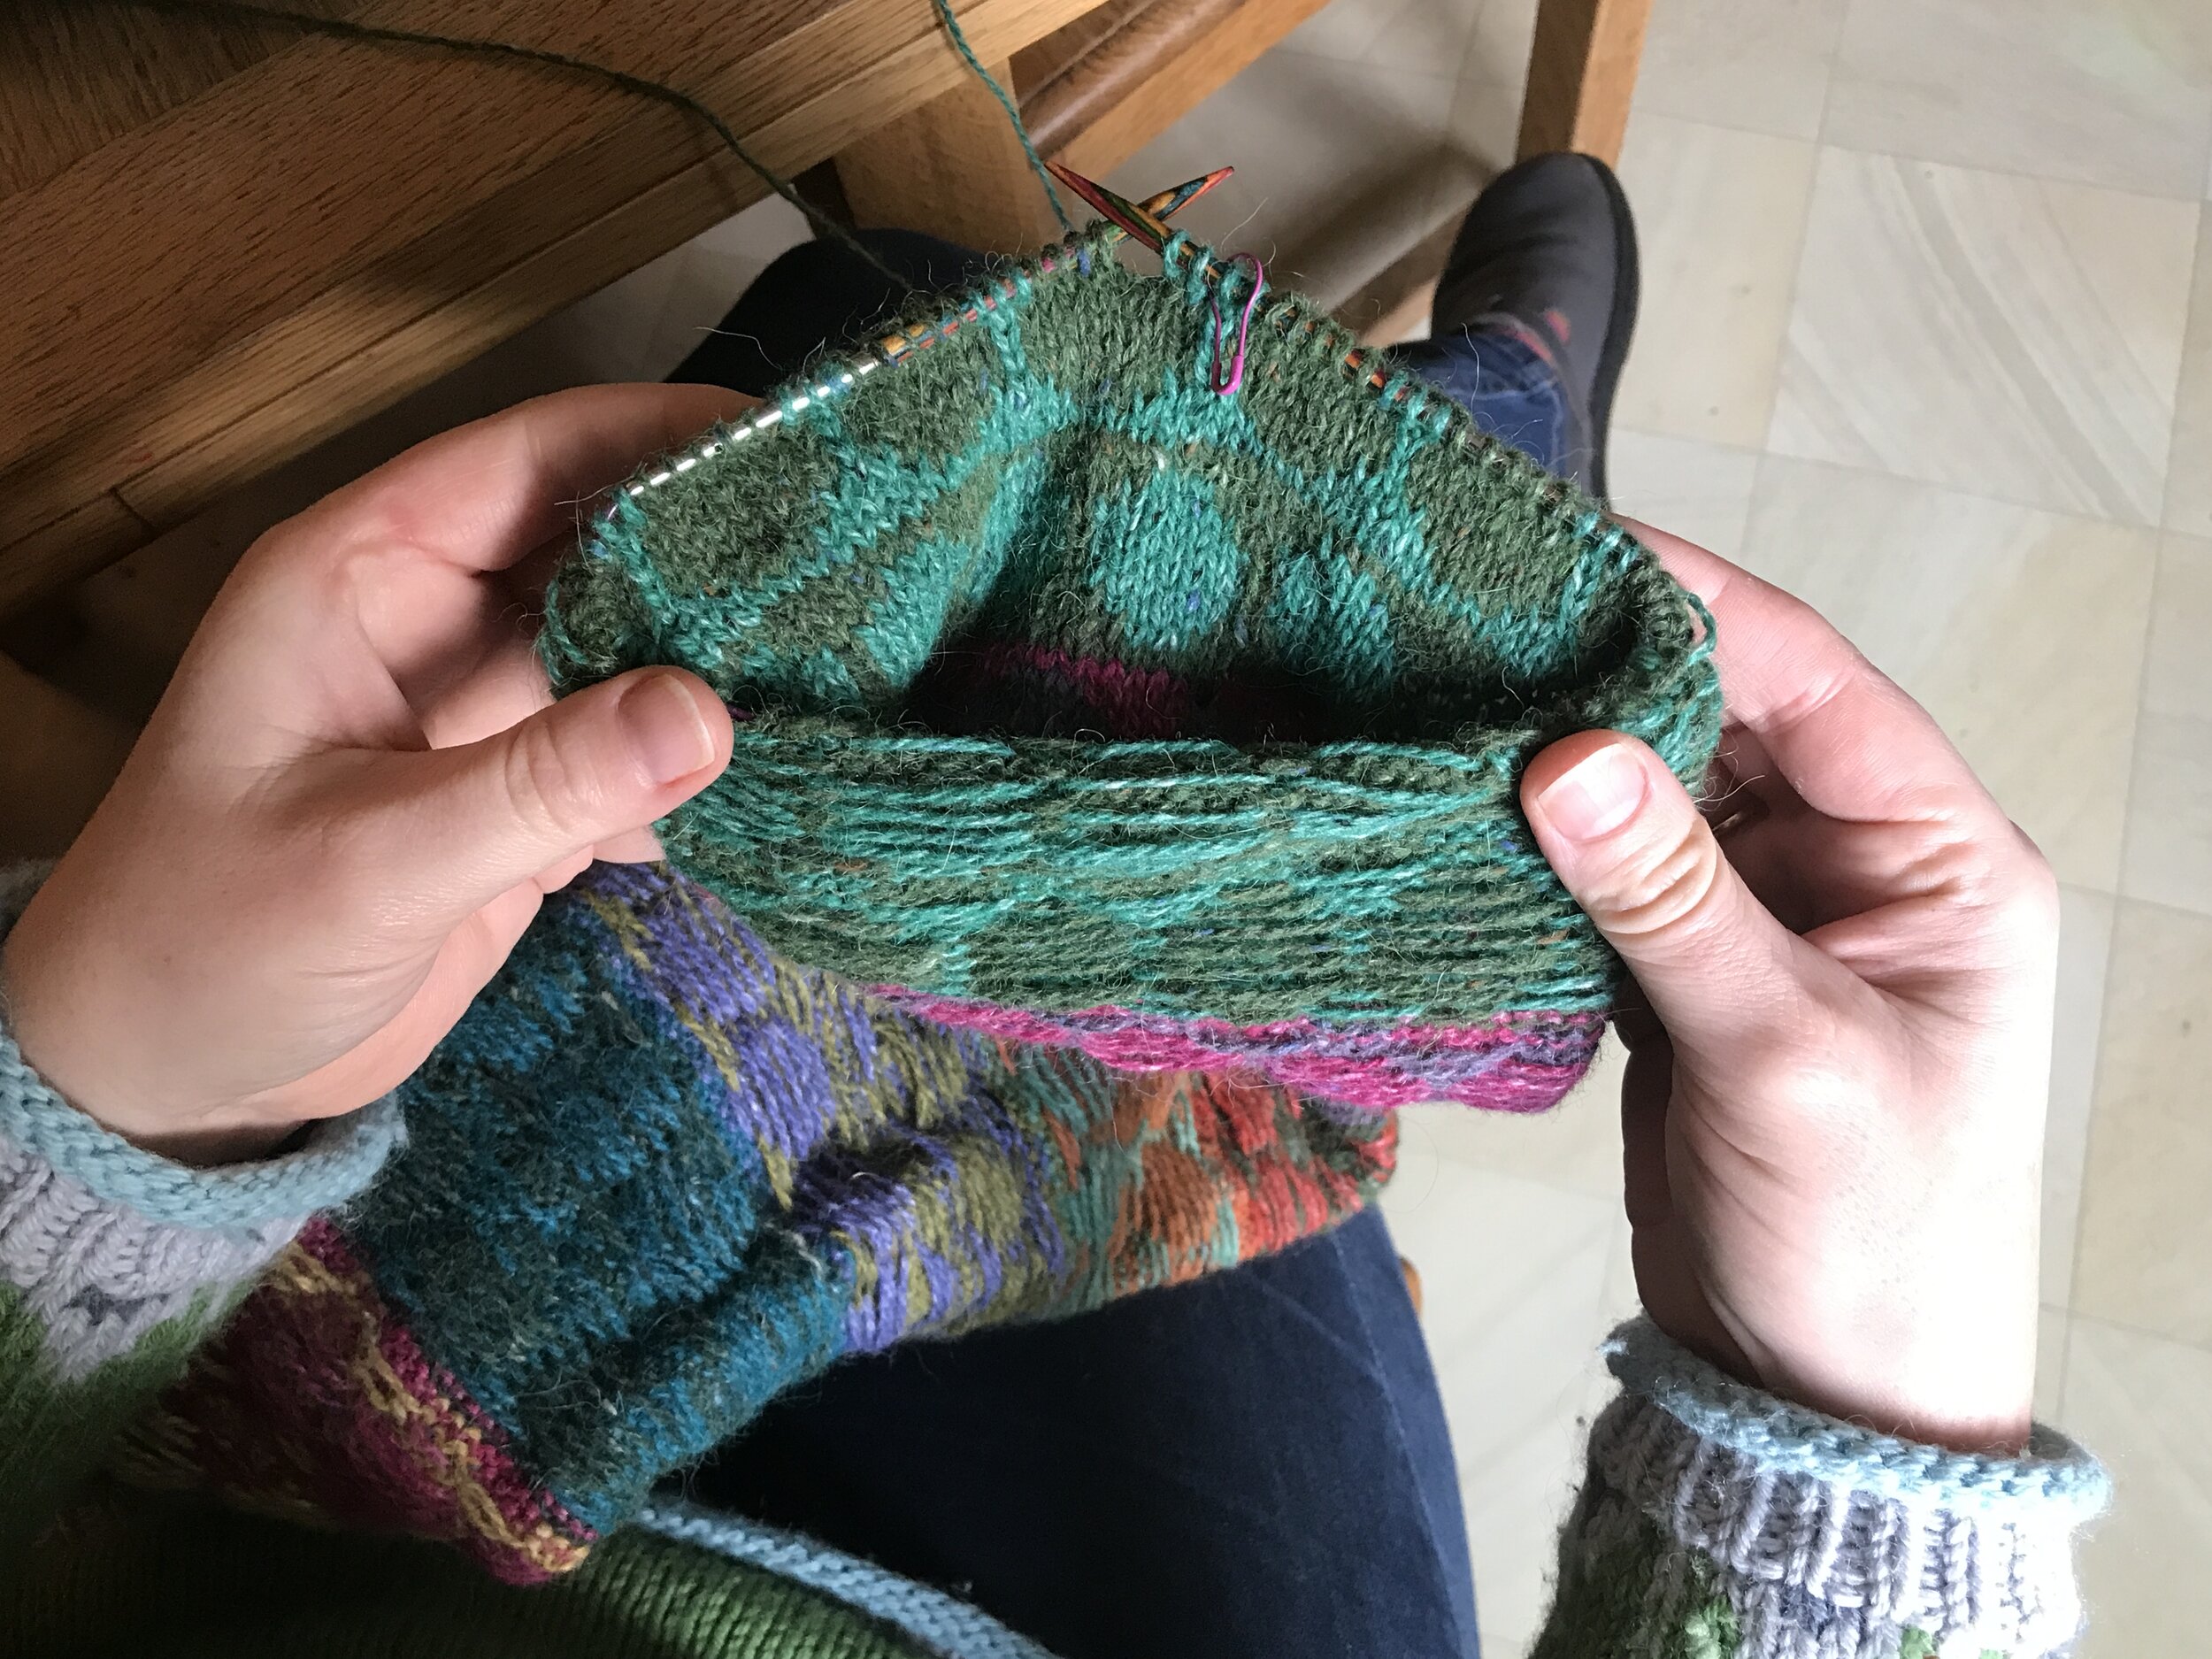 Can I iron on interfacing over the back of this color work? : r/knitting